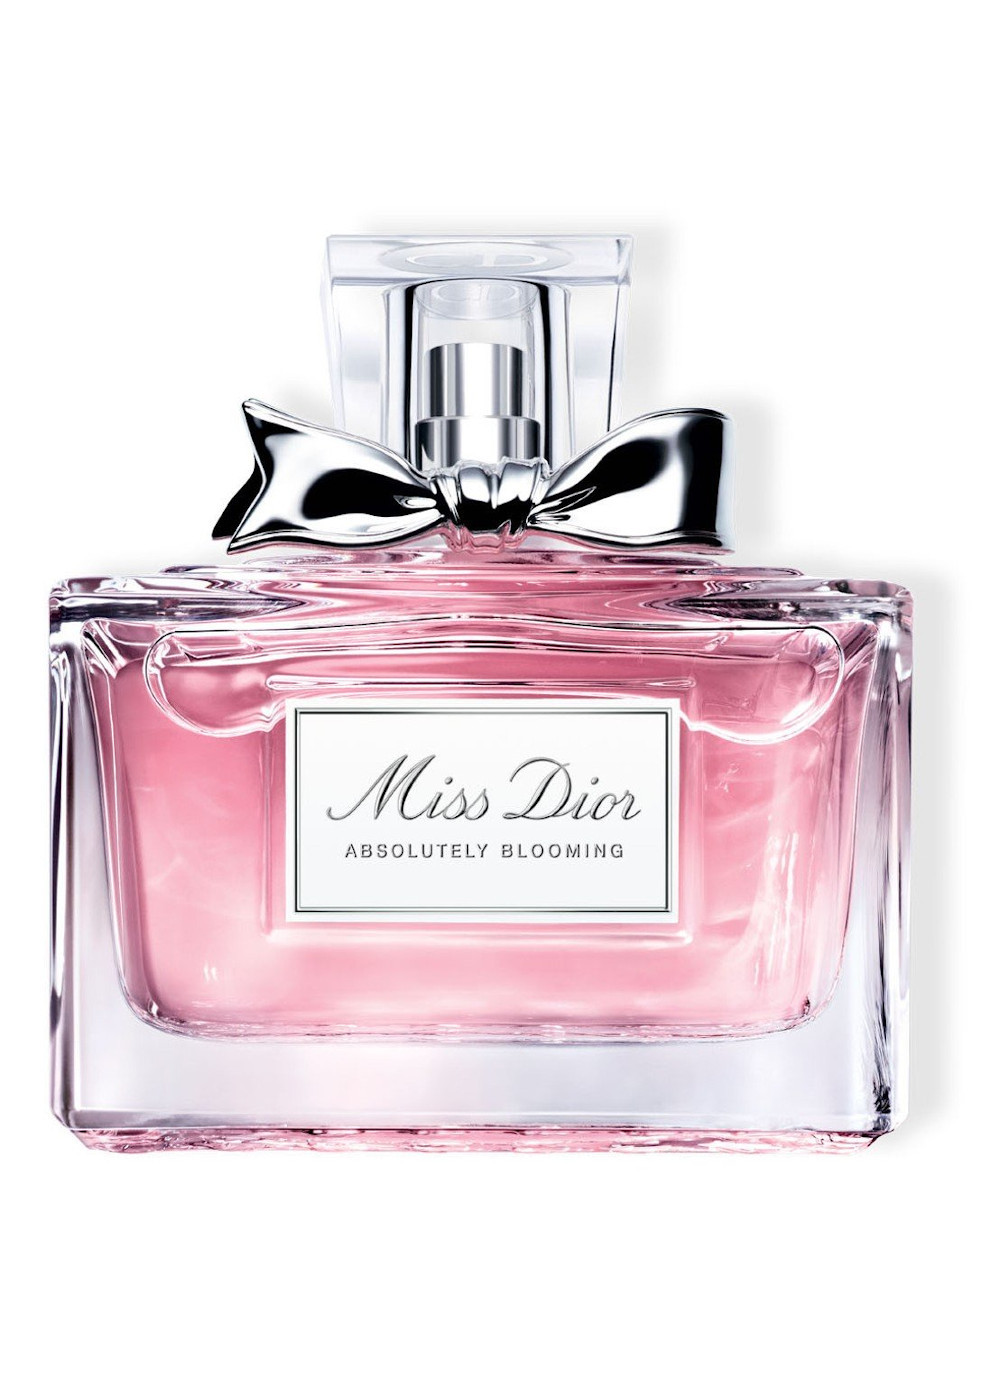 Miss Dior Absolutely Blooming - Christian Dior - 30 ml - edp